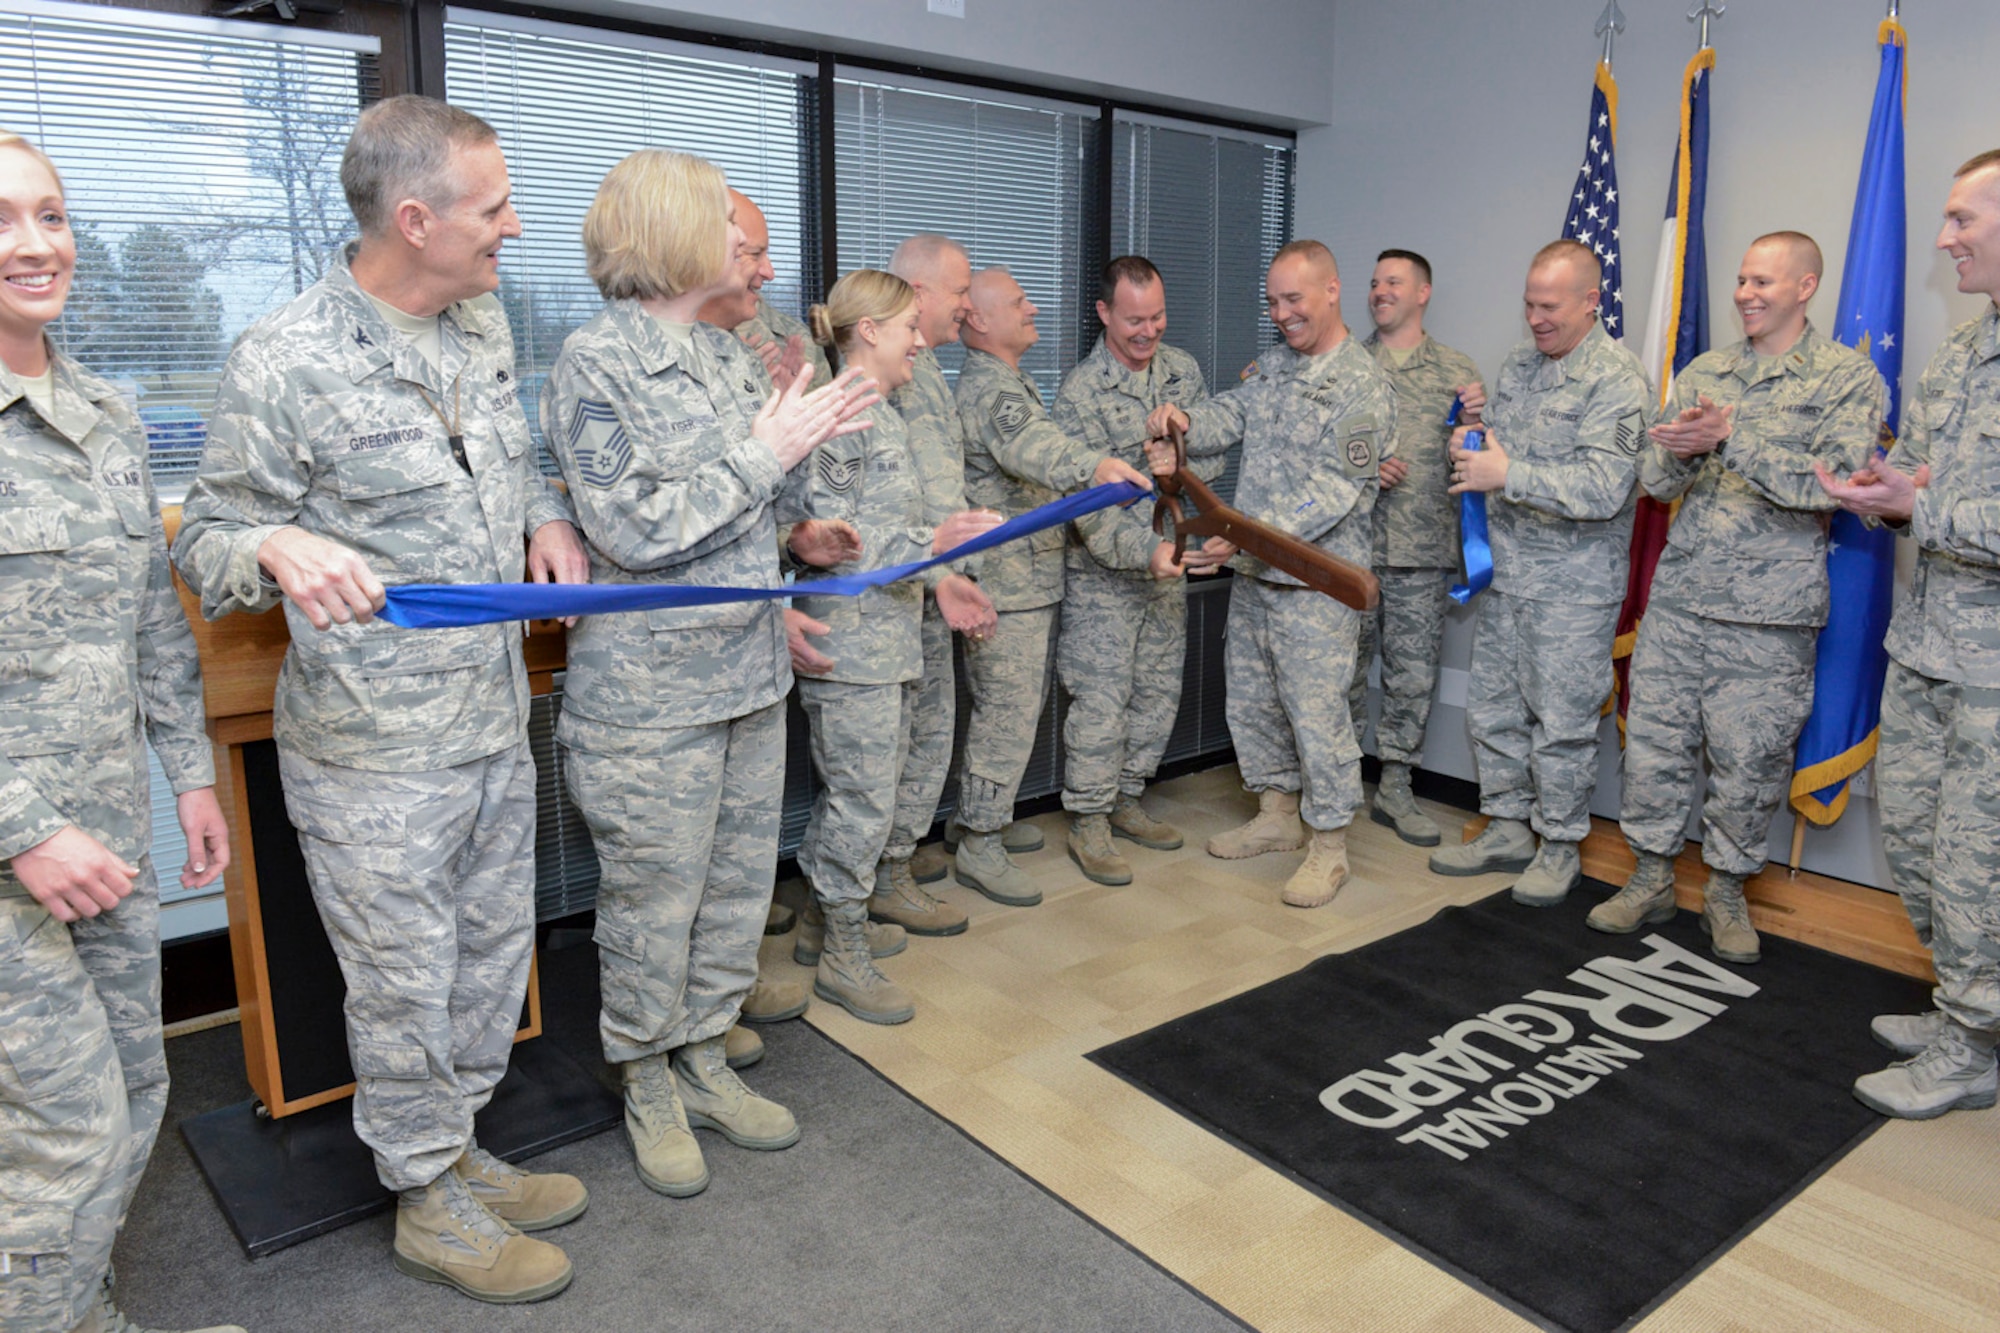 The Adjutant General of the Iowa National Guard, Maj. Gen. Timothy Orr (scissors, right), and 132d Wing (132WG) Commander, Col. Kevin Heer (scissors, left), cut the ribbon as members of the Iowa Air and Army National Guard celebrate the opening of the 132WG, Des Moines, Iowa off-site Recruiting Operation Center during a ribbon cutting ceremony held at the new Recruiting Operation Center in West Des Moines, Iowa on Tuesday, March 24, 2015.  Leaders of the Iowa National Guard, leaders of the 132WG and members of the 132WG Force Support Squadron hold the ribbon as it is being cut.  (U.S. Air National Guard photo by Staff Sgt. Linda K. Burger/Released)